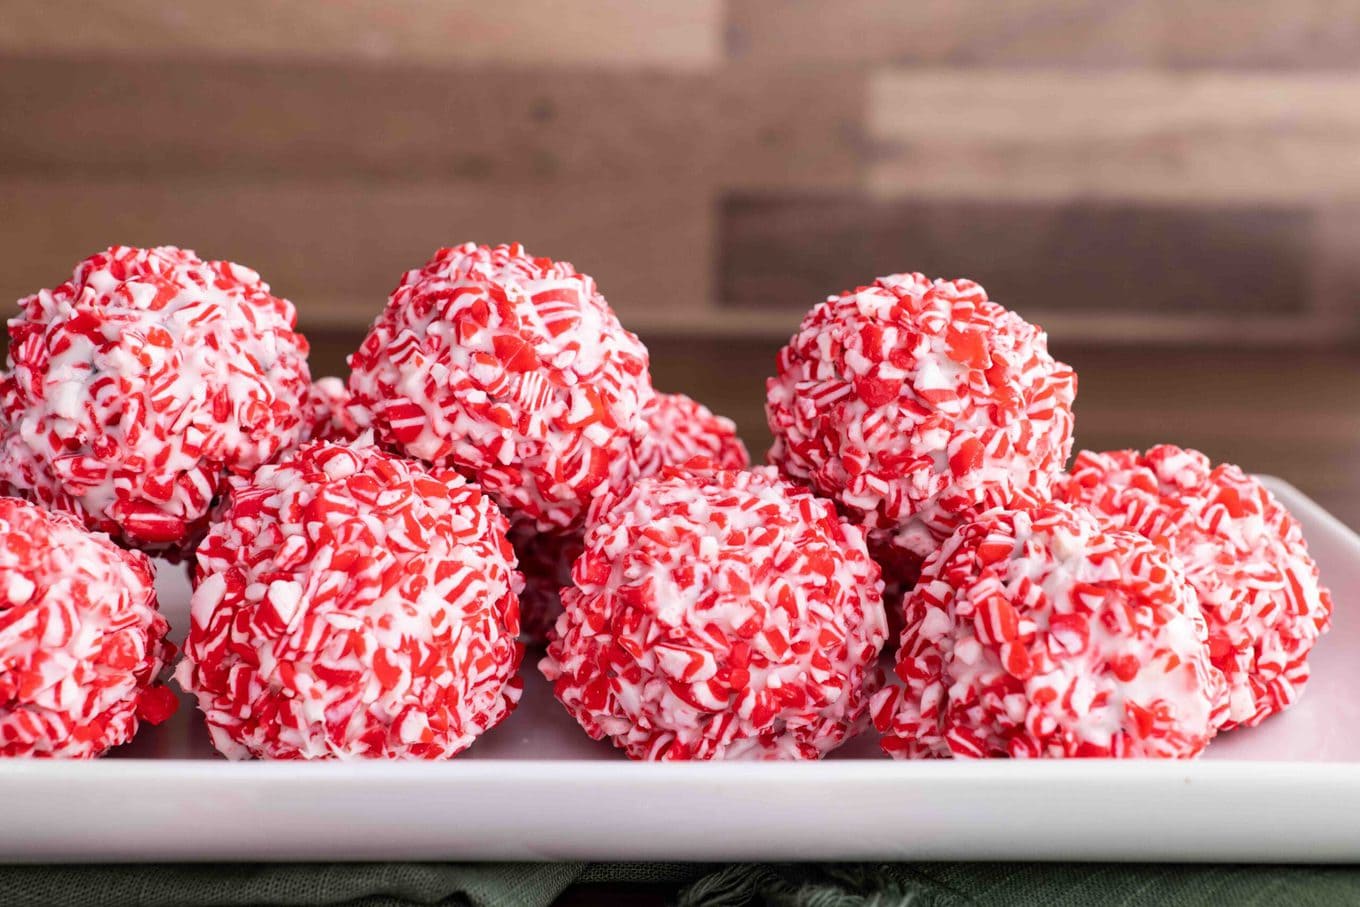 Peppermint Oreo Balls on serving tray